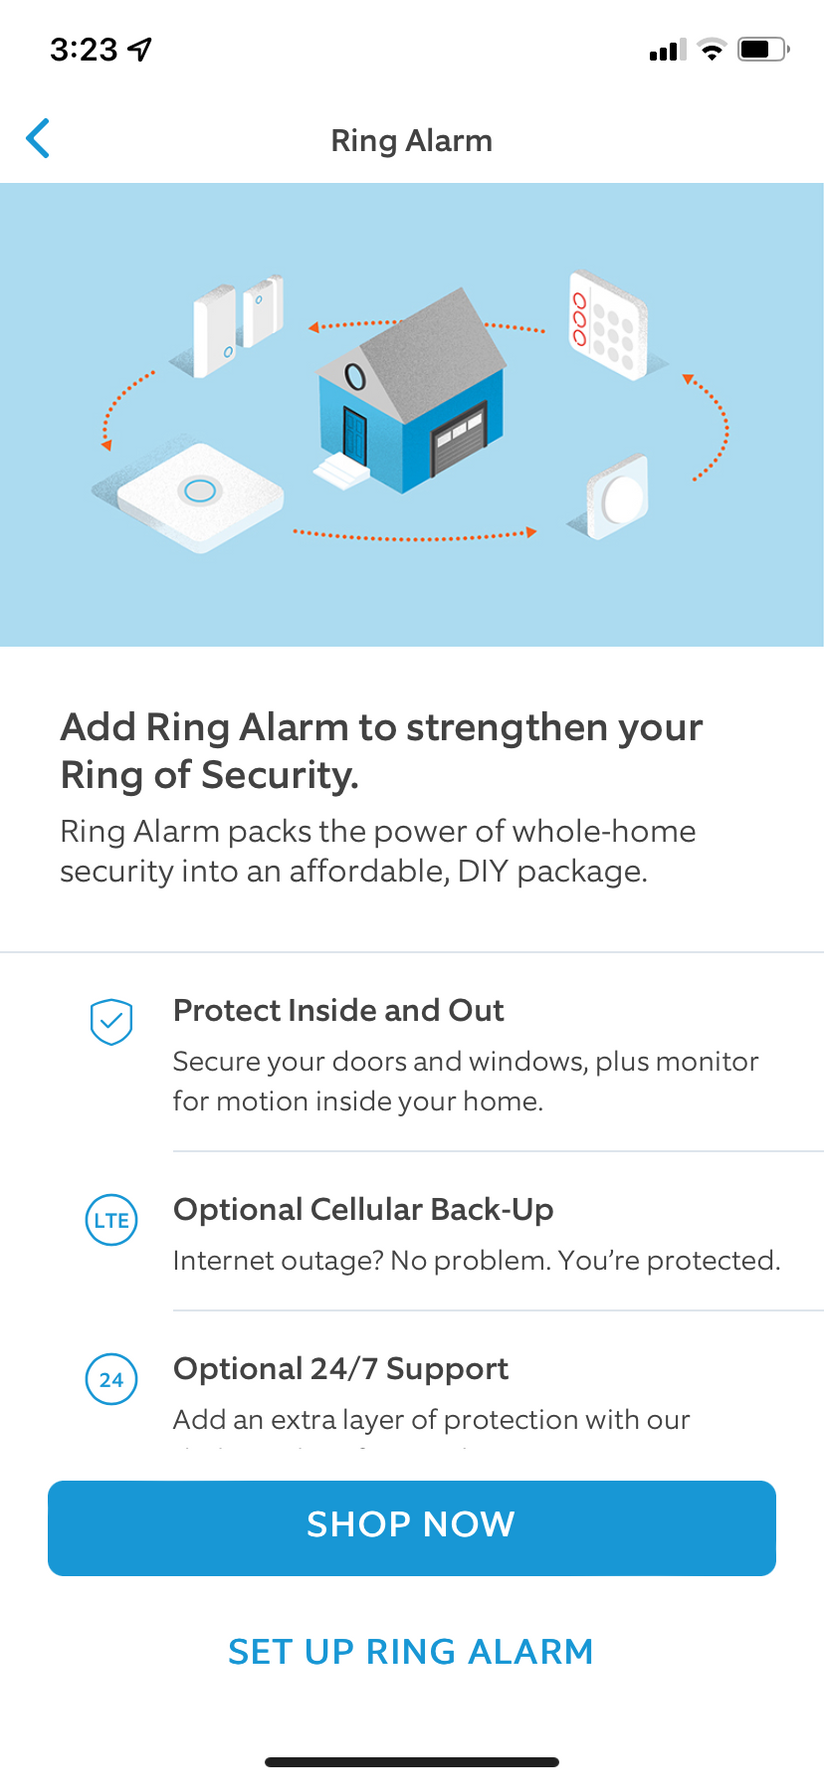 Ring Alarm Pro Security Kit with eero Wi-Fi 6 Router Review - Gearbrain